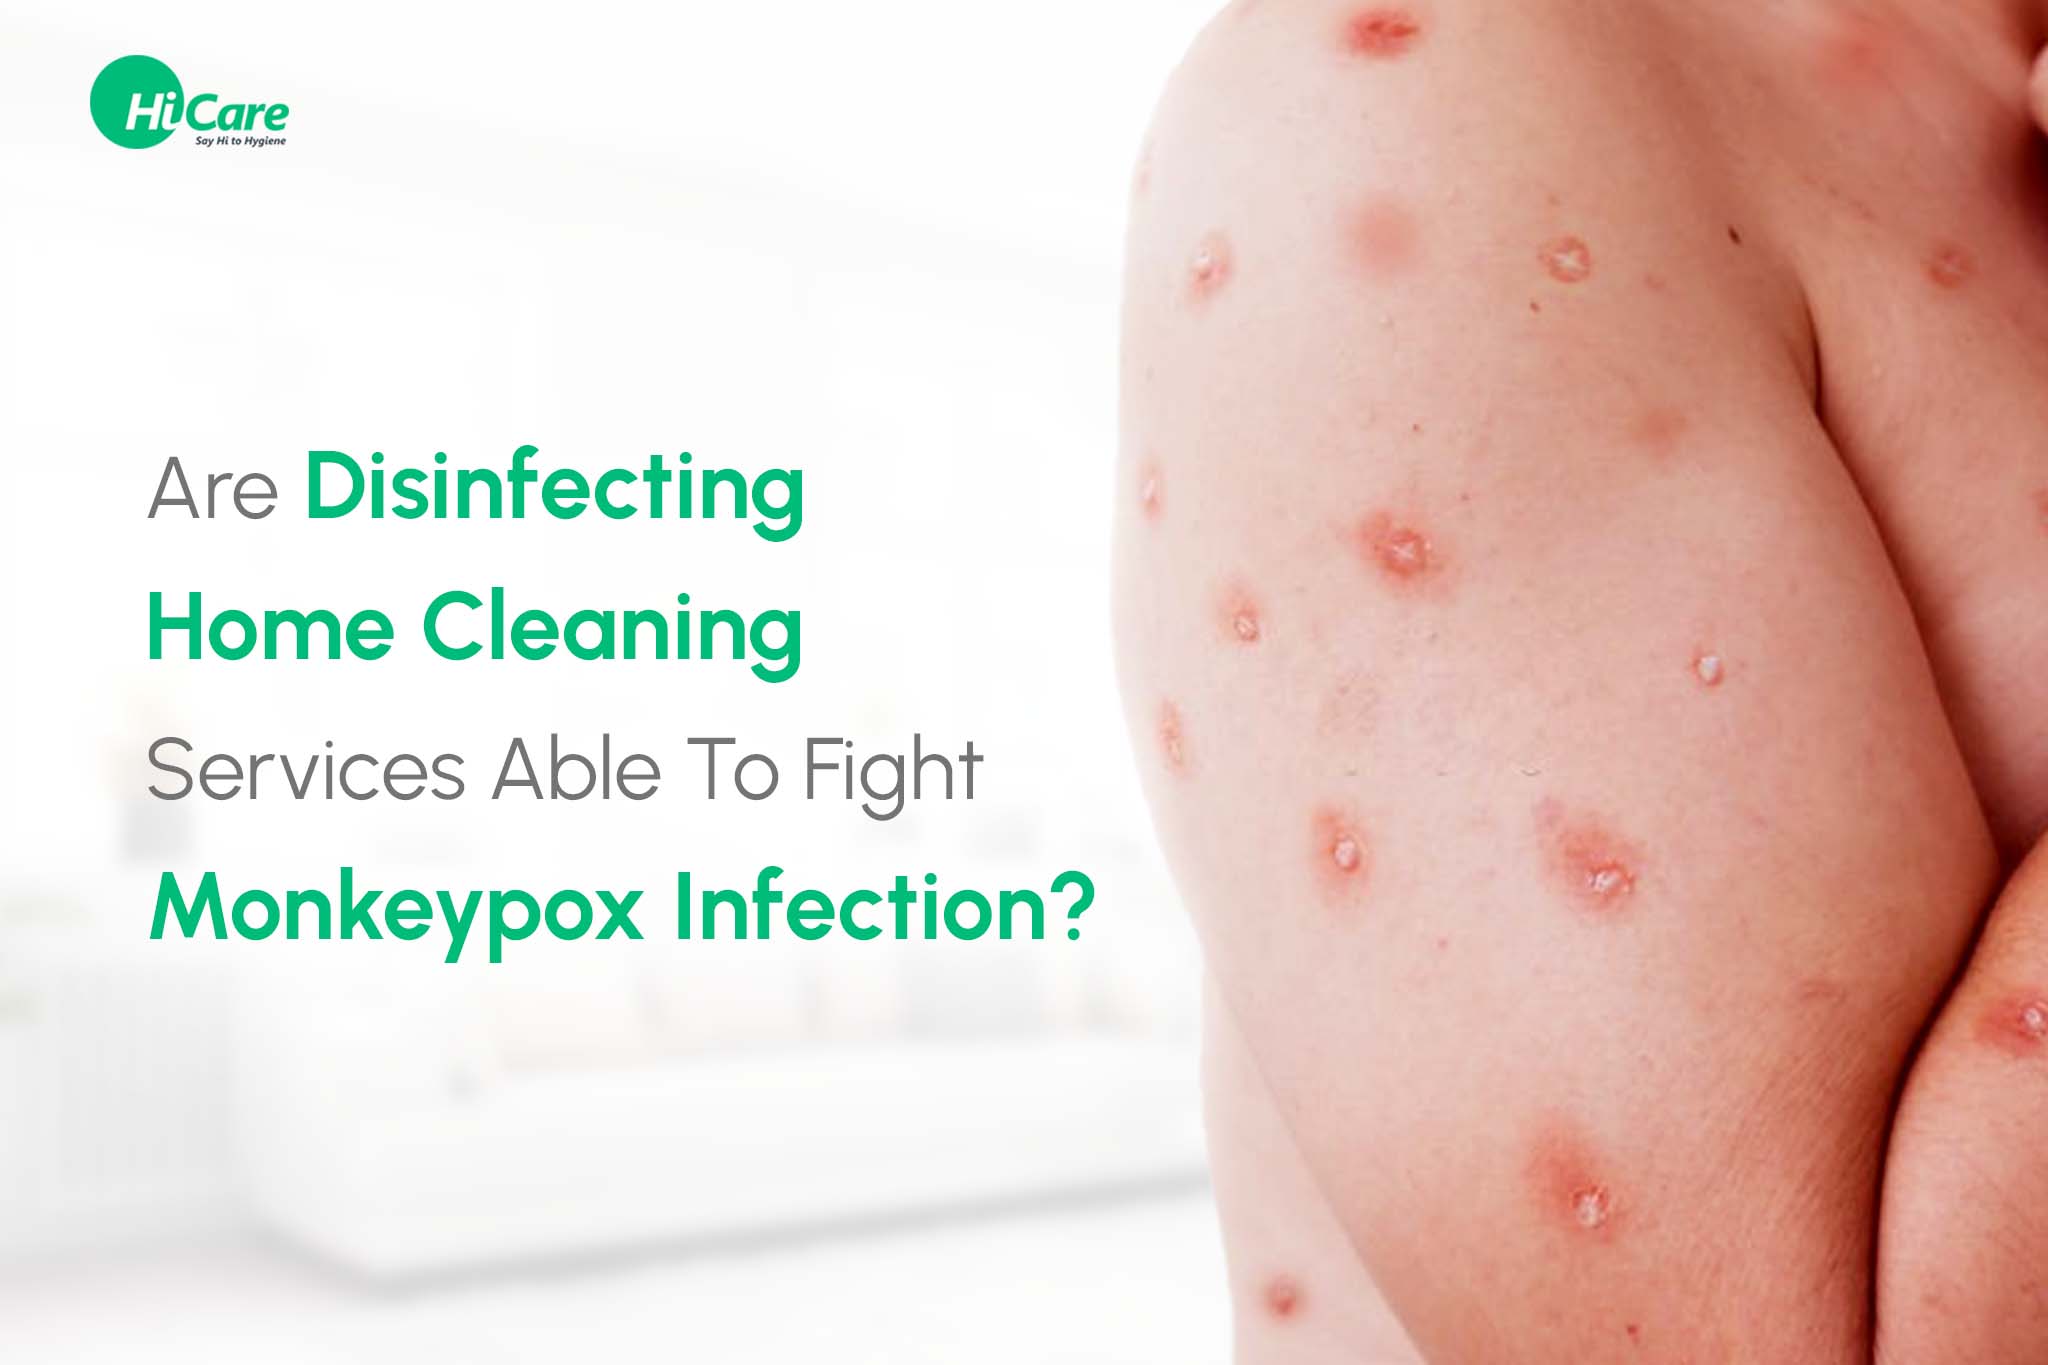 are disinfecting home cleaning services able to fight monkeypox infection